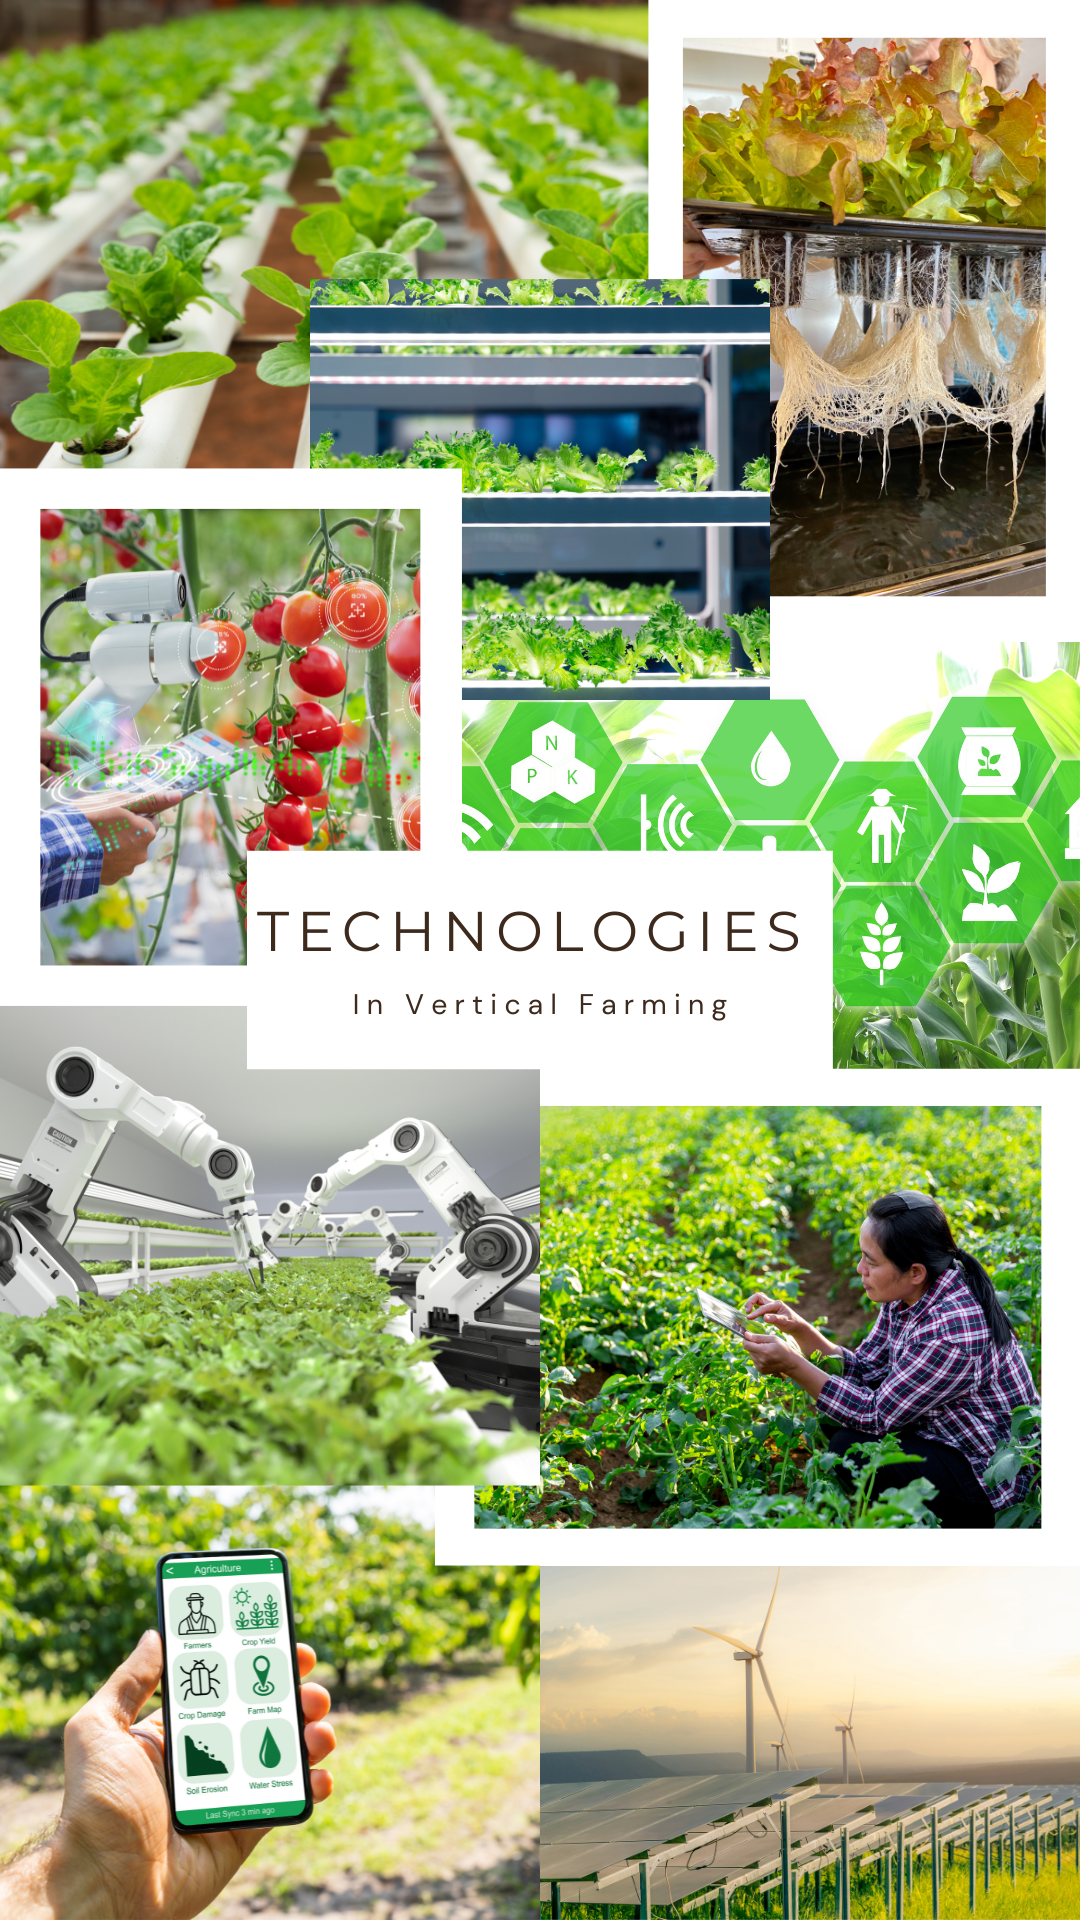 Technologies we leverage in Vertical Farming